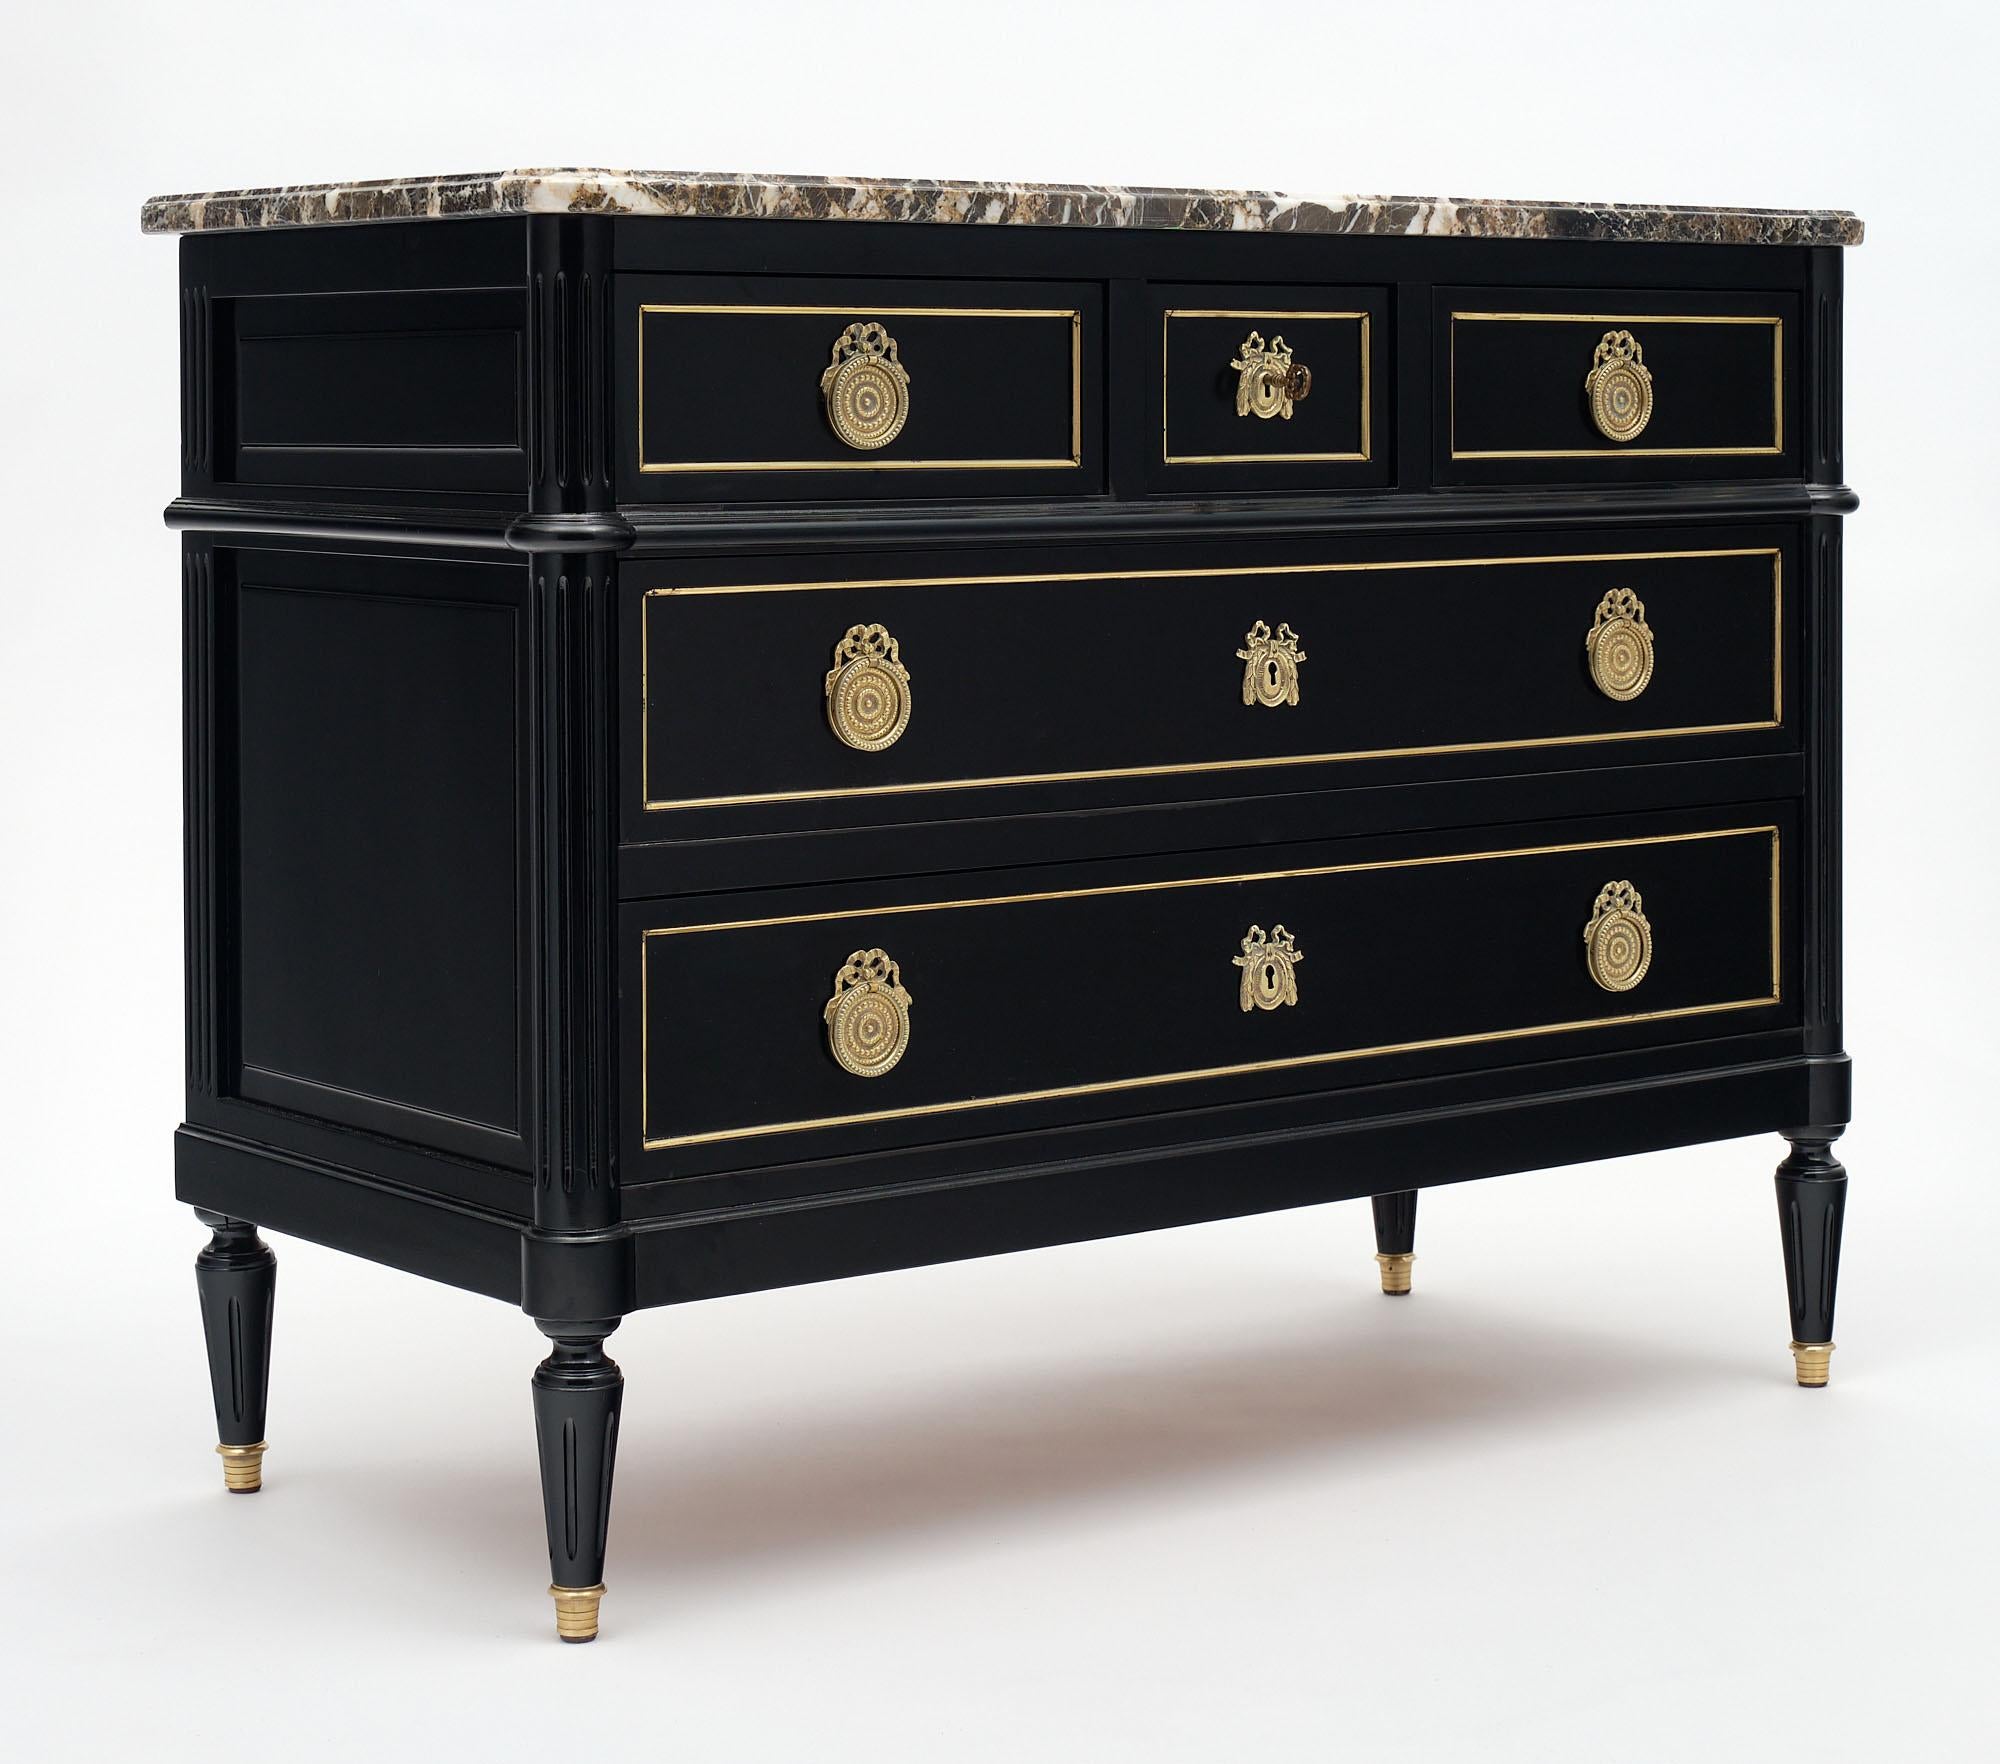 Chest or “commode” from France made of mahogany that has been ebonized and finished with a lustrous museum quality French polish finish. It features finely cast bronze hardware and a Turquin intact marble top. There are two dovetailed drawers below